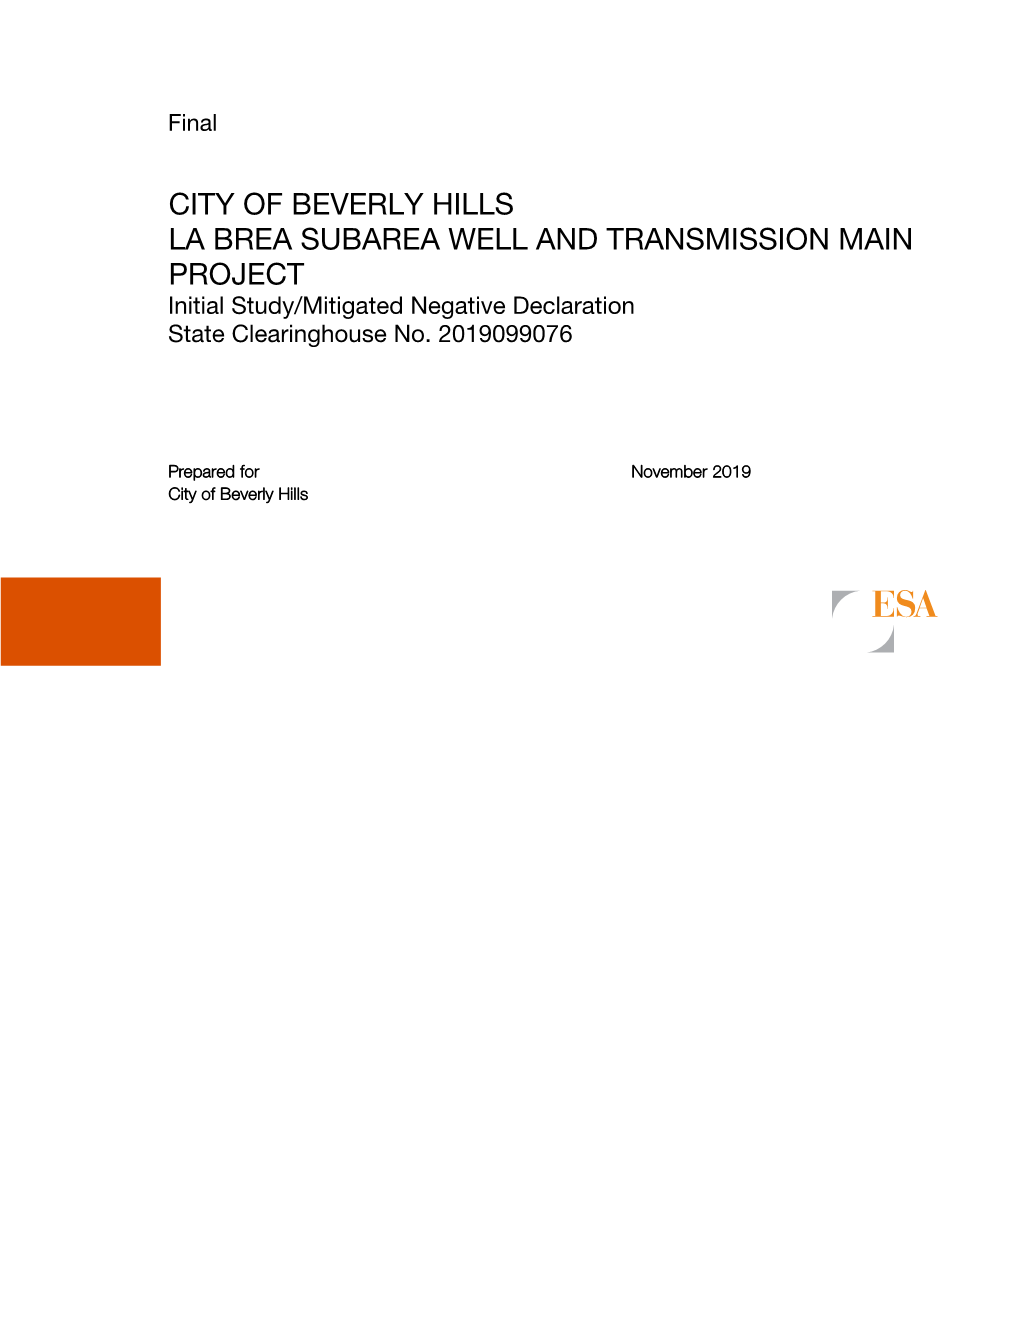 CITY of BEVERLY HILLS LA BREA SUBAREA WELL and TRANSMISSION MAIN PROJECT Initial Study/Mitigated Negative Declaration State Clearinghouse No